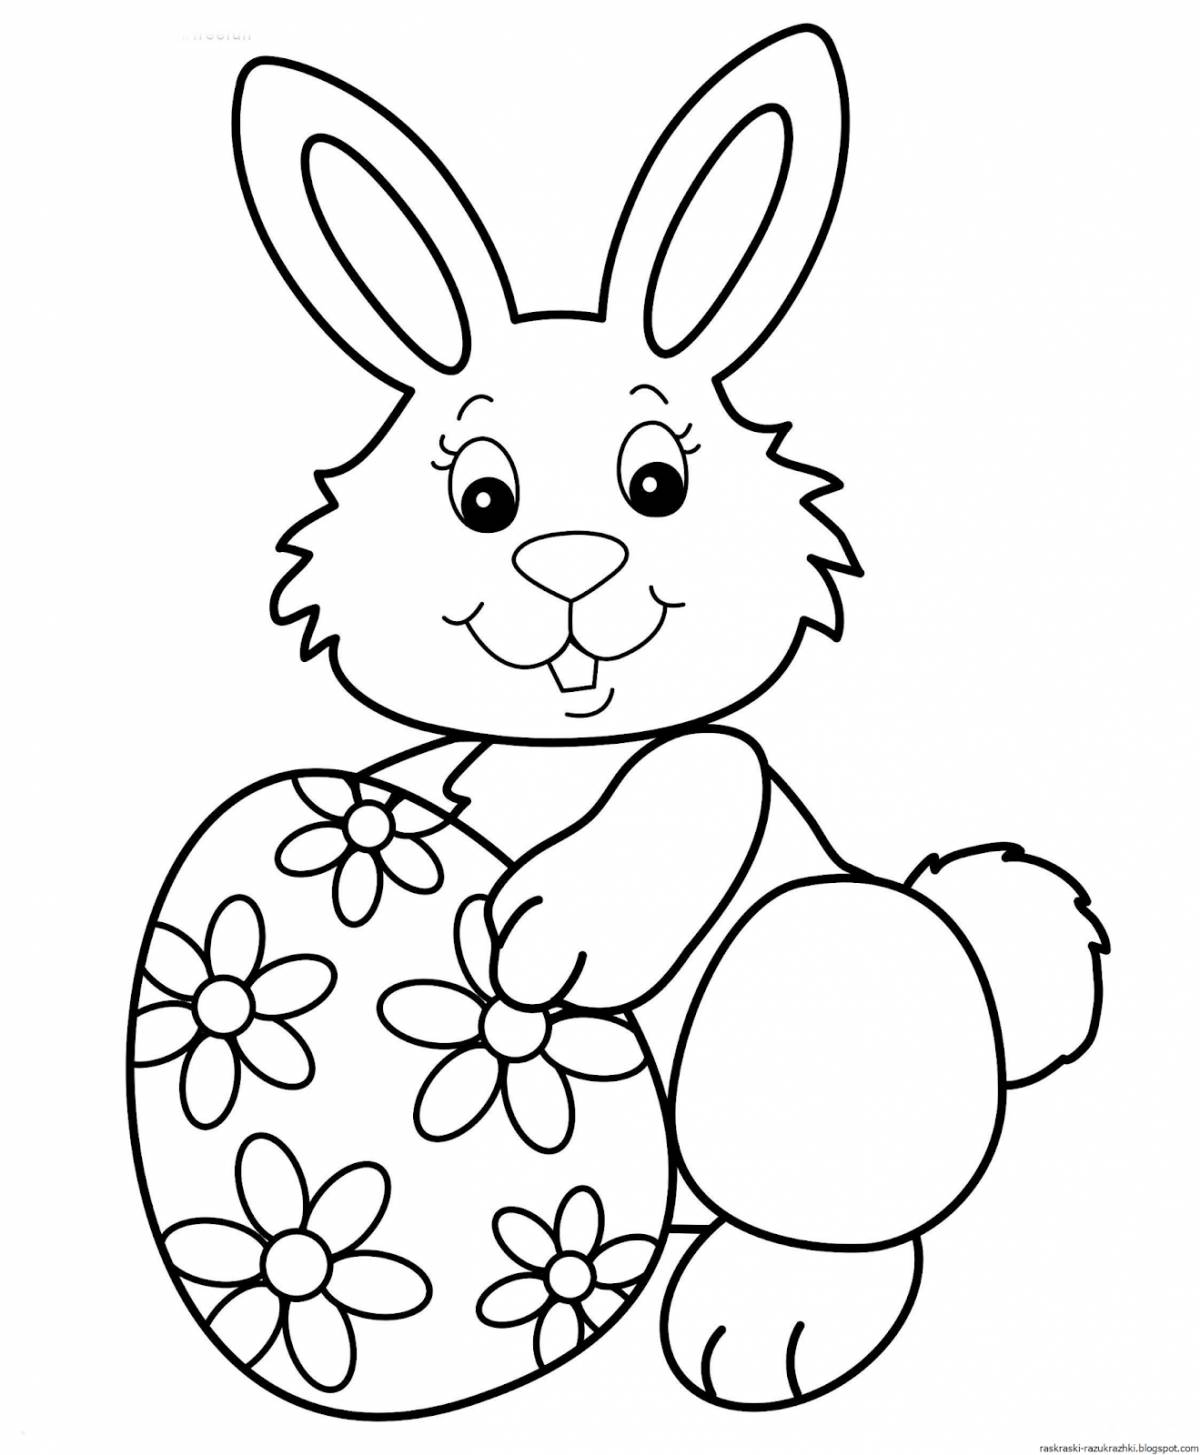 Fun coloring hare for children 3-4 years old